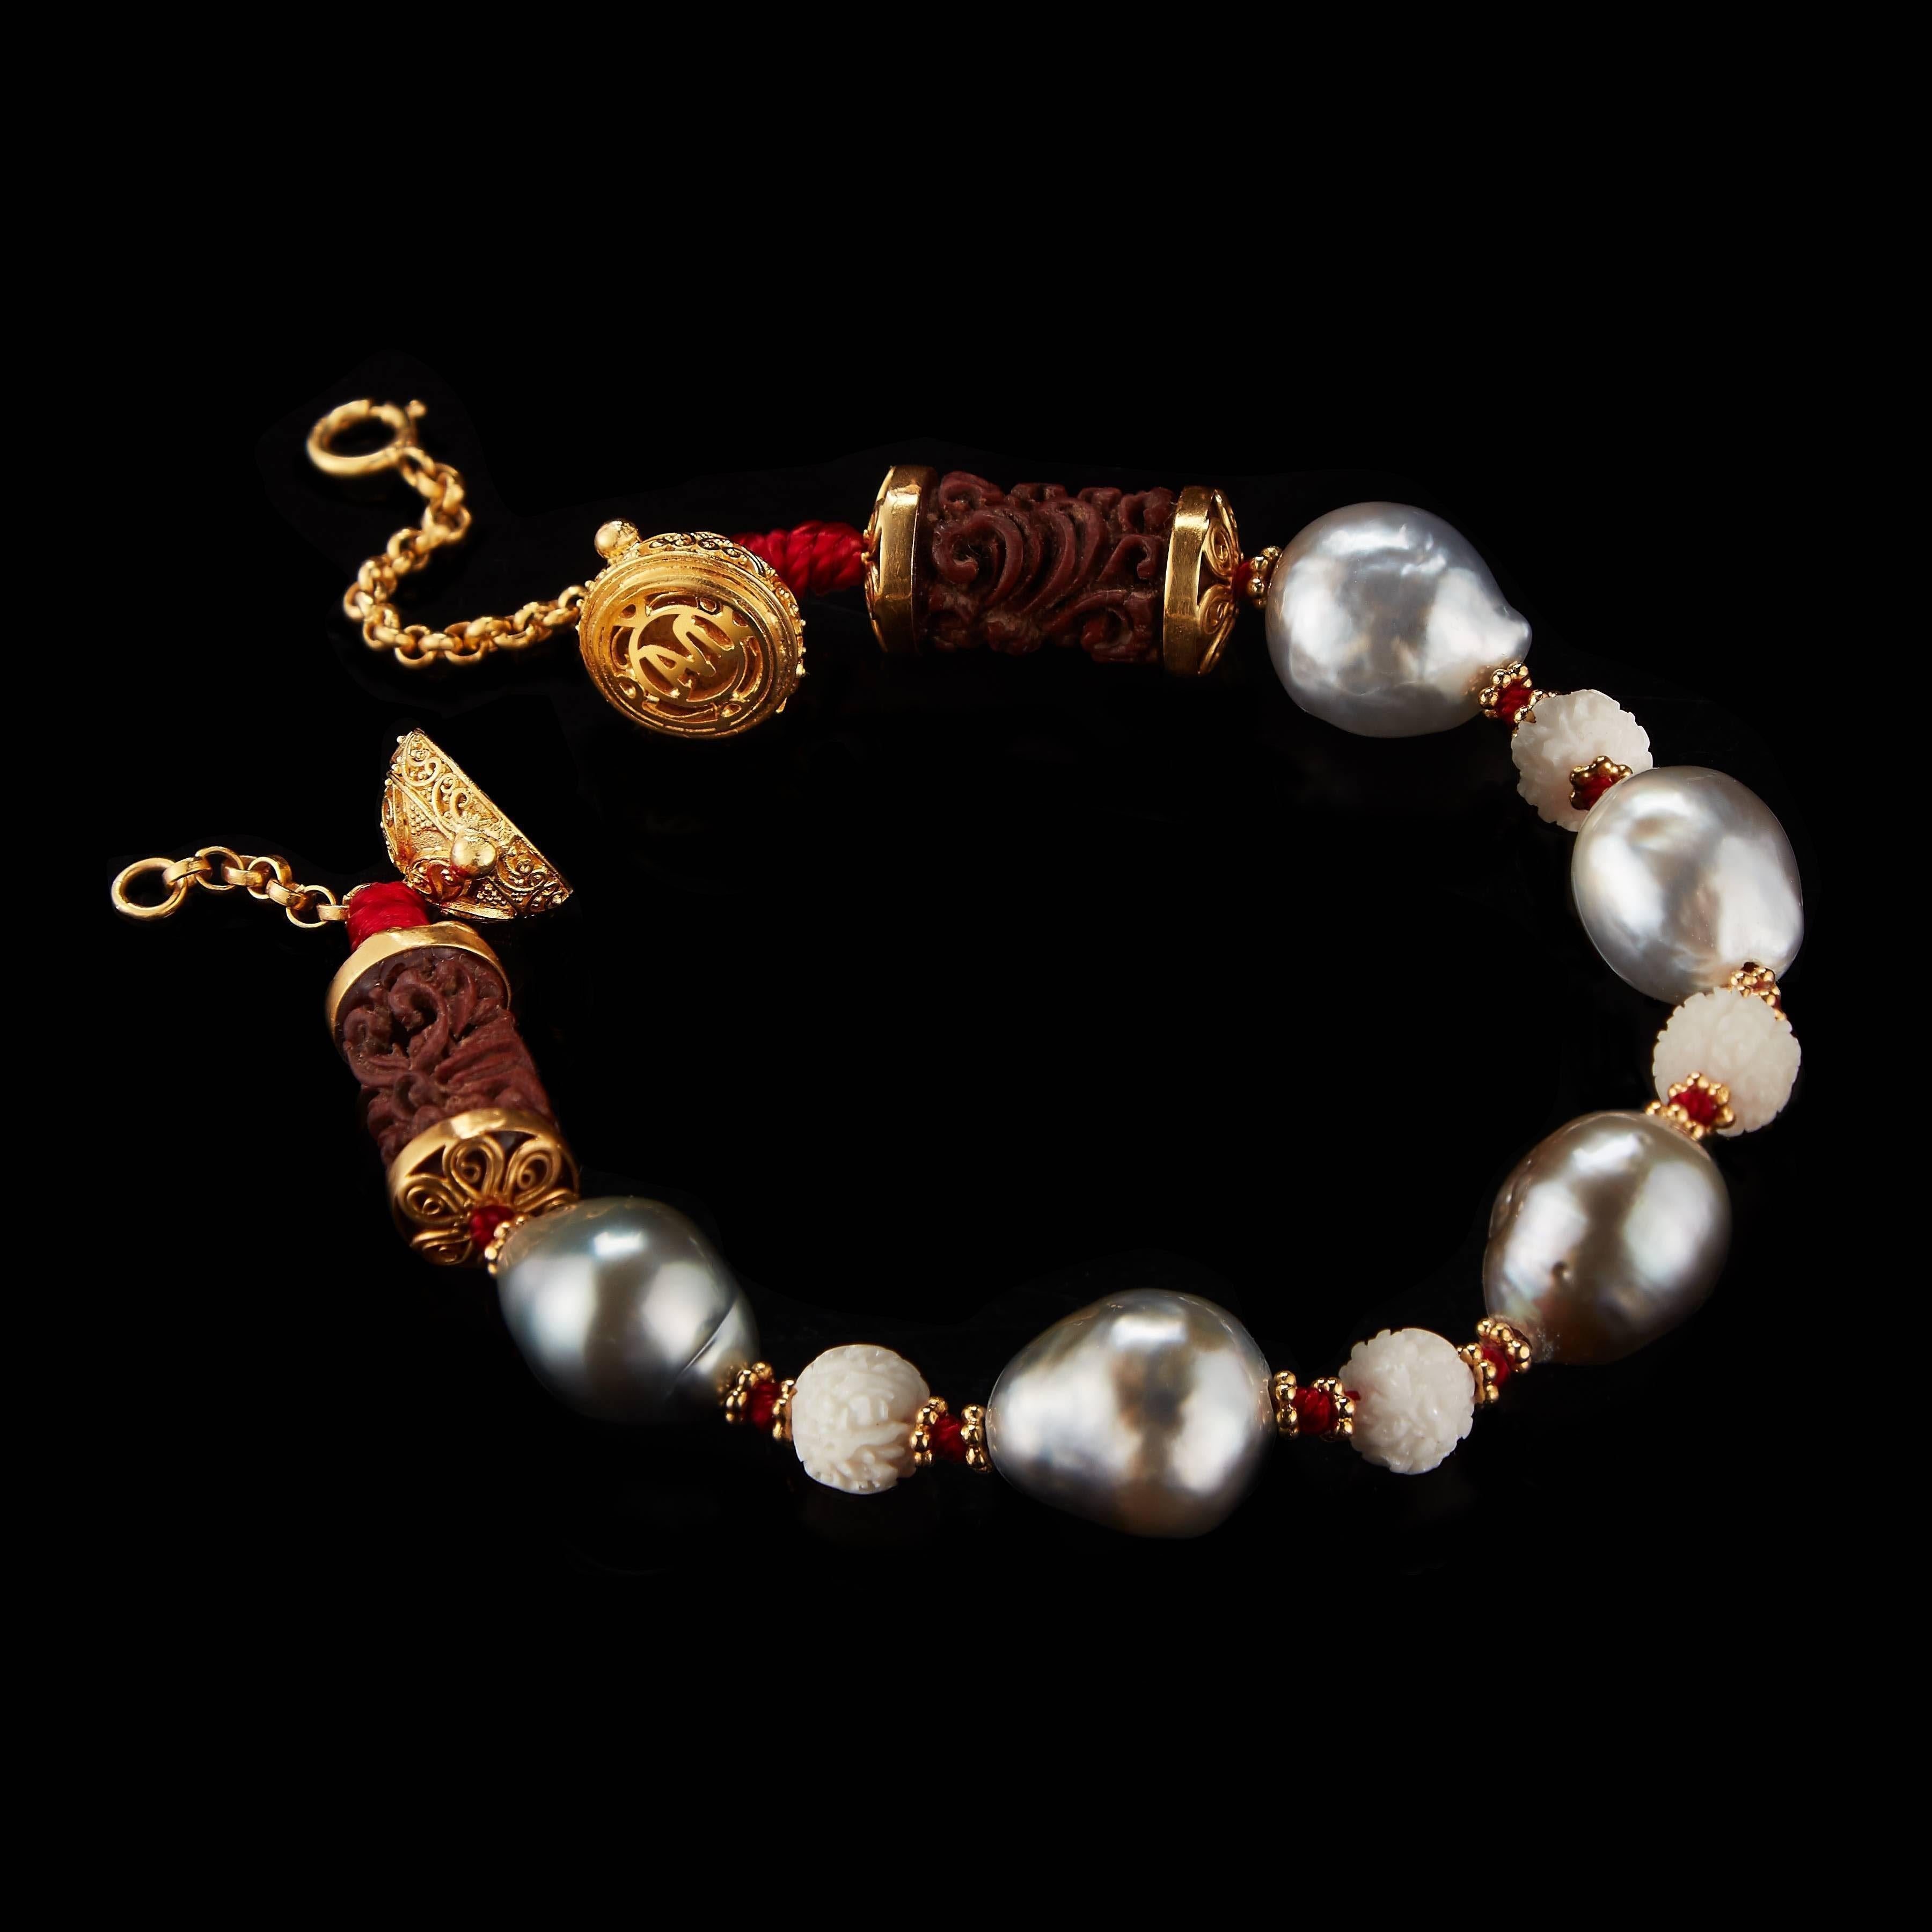 *Please contact us for more information on this piece or on creating your own Alexandra Mor custom Design. 

This Tibetan inspired Alexandra Mor bracelet features 11mm beads made from carved wild-harvested Tagua, Sawo wood, Baroque South Sea pearls